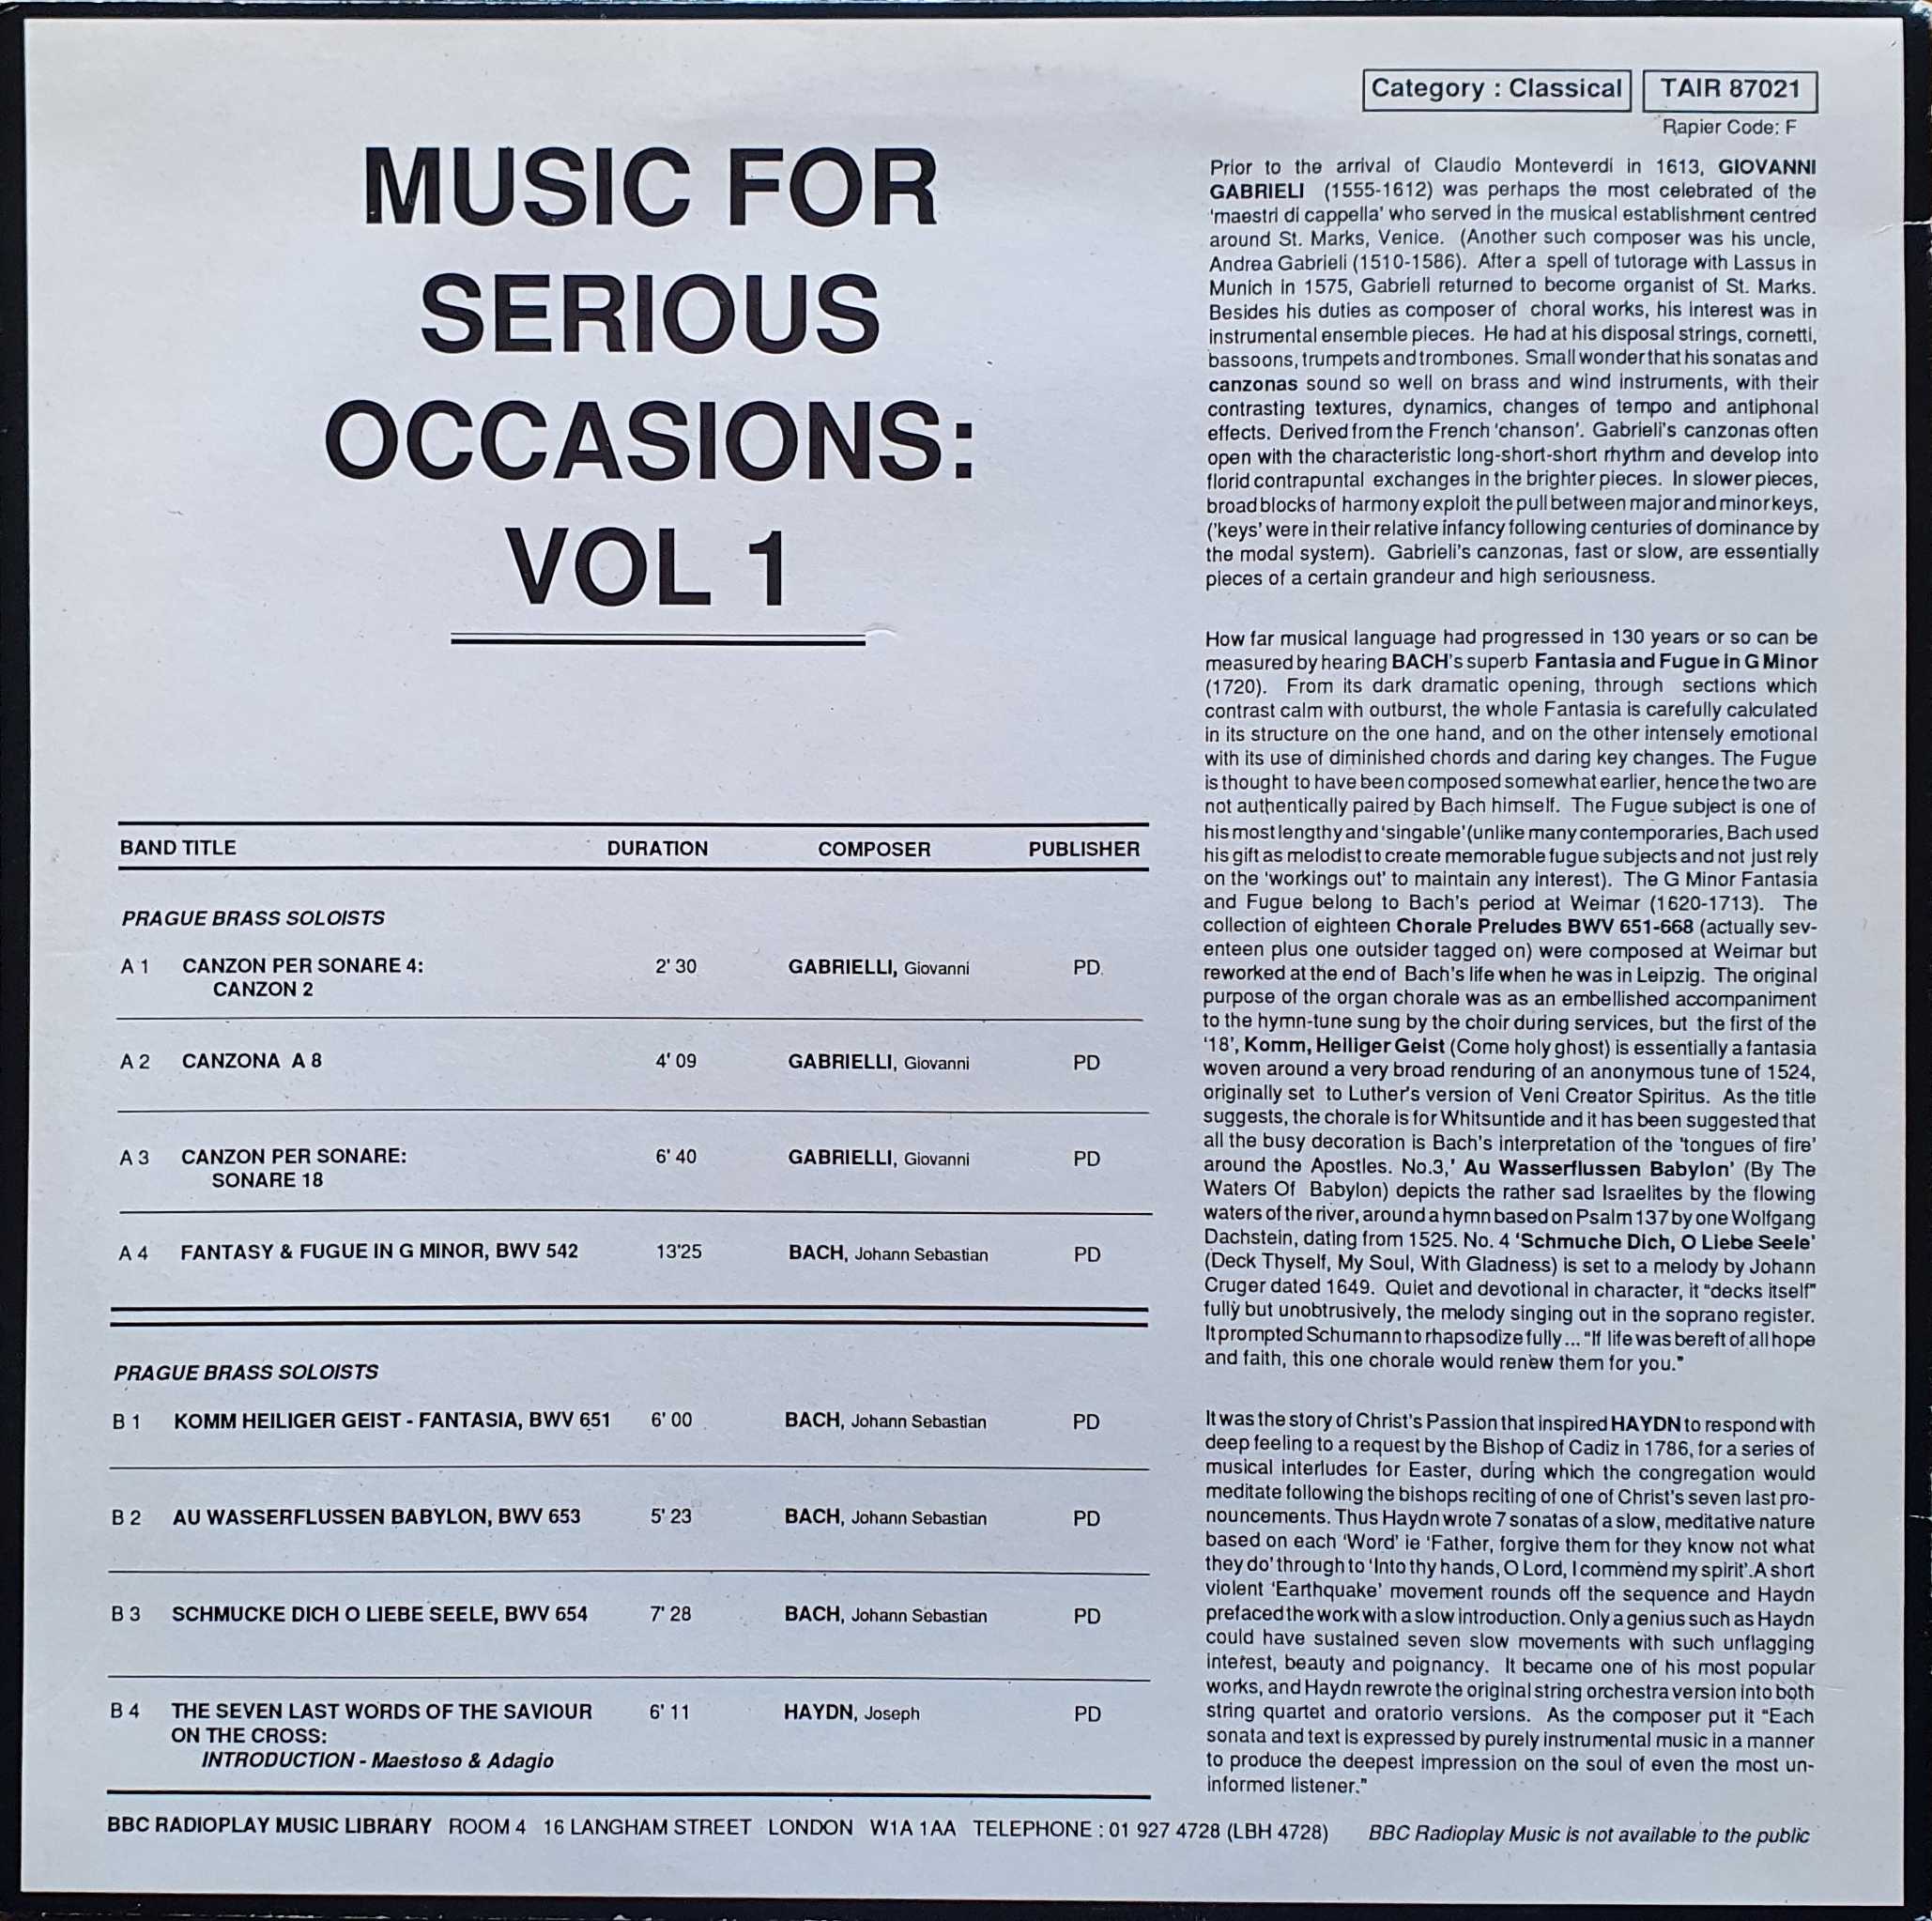 Picture of TAIR 87021 Music for serious occasions 1 by artist Prague Brass soloists from the BBC records and Tapes library